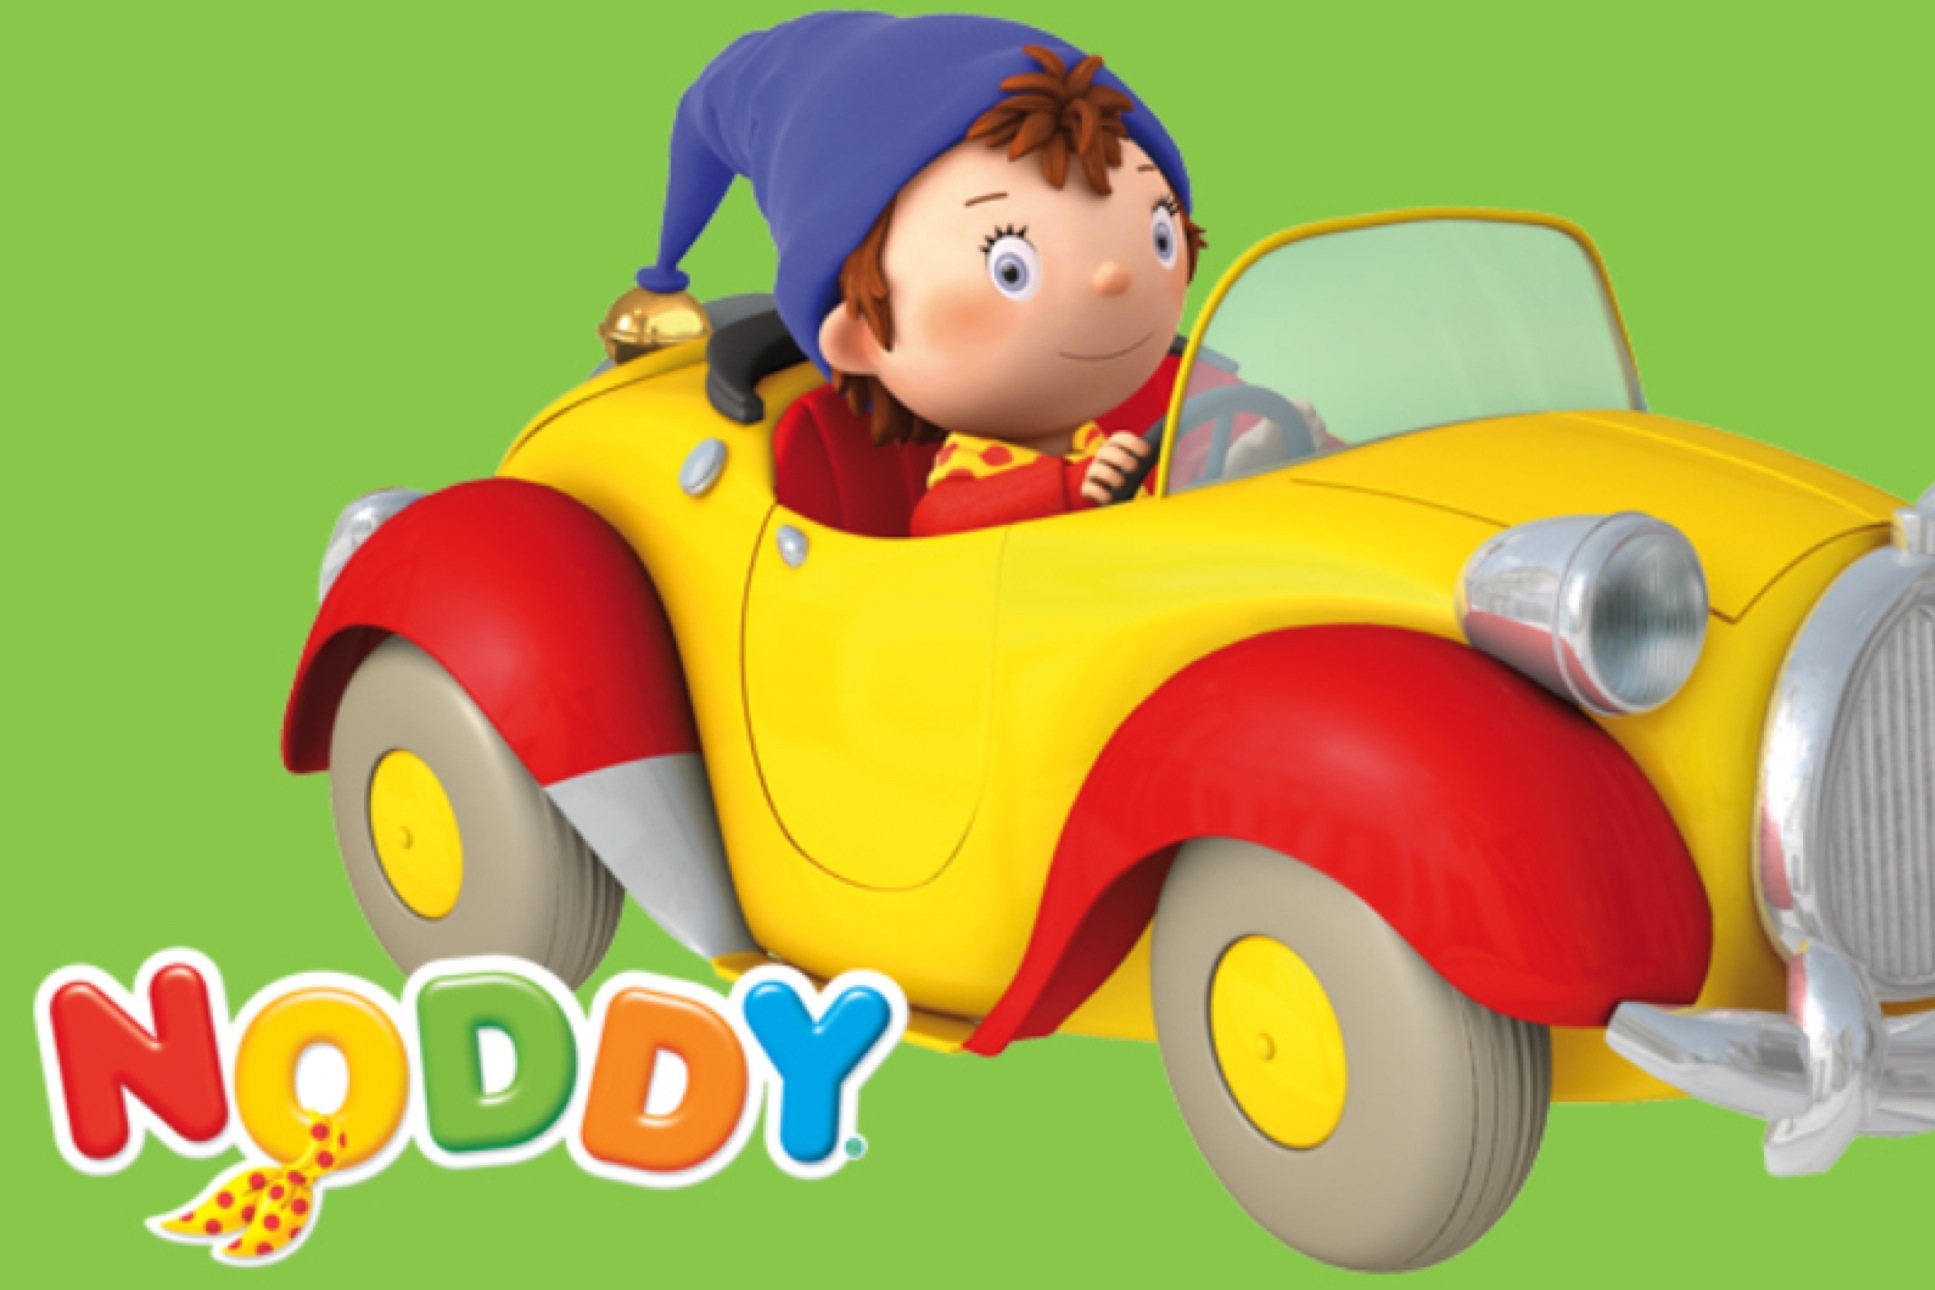 Noddy Pics, TV Show Collection